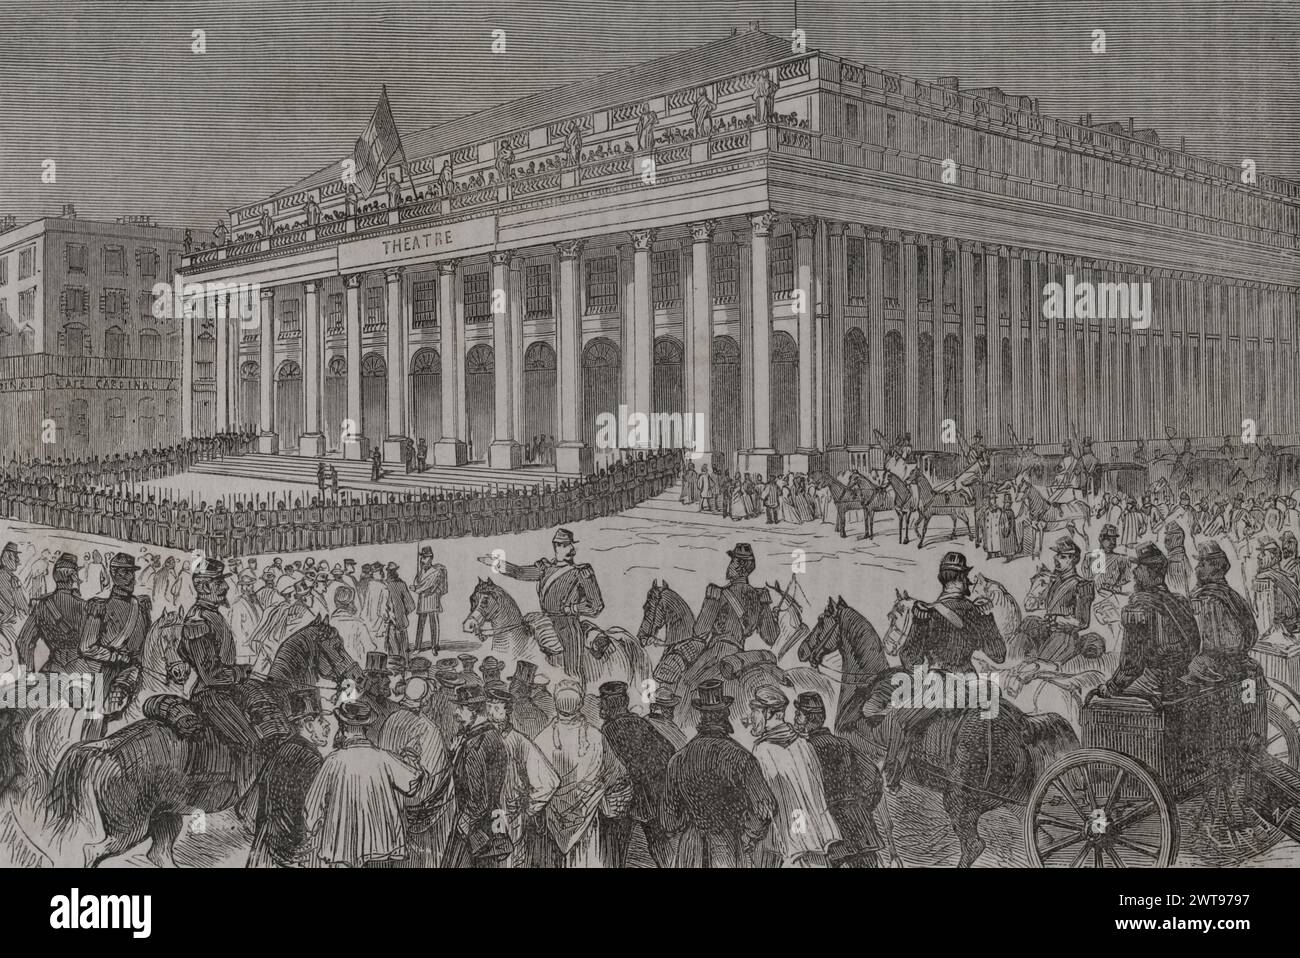 Franco-Prussian War (1870-1871). During the war, the city of Bordeaux temporarily (from 8 February to 20 March 1871) became the seat of the French government. Exterior view of the Grand Théâtre where the National Assembly of the French Parliament met, 13 February 1871. Drawing by Miranda. Engraving by Capuz. 'Historia de la Guerra de Francia y Prusia' (History of the War between France and Prussia). Volume II. Published in Barcelona, 1871. Stock Photo